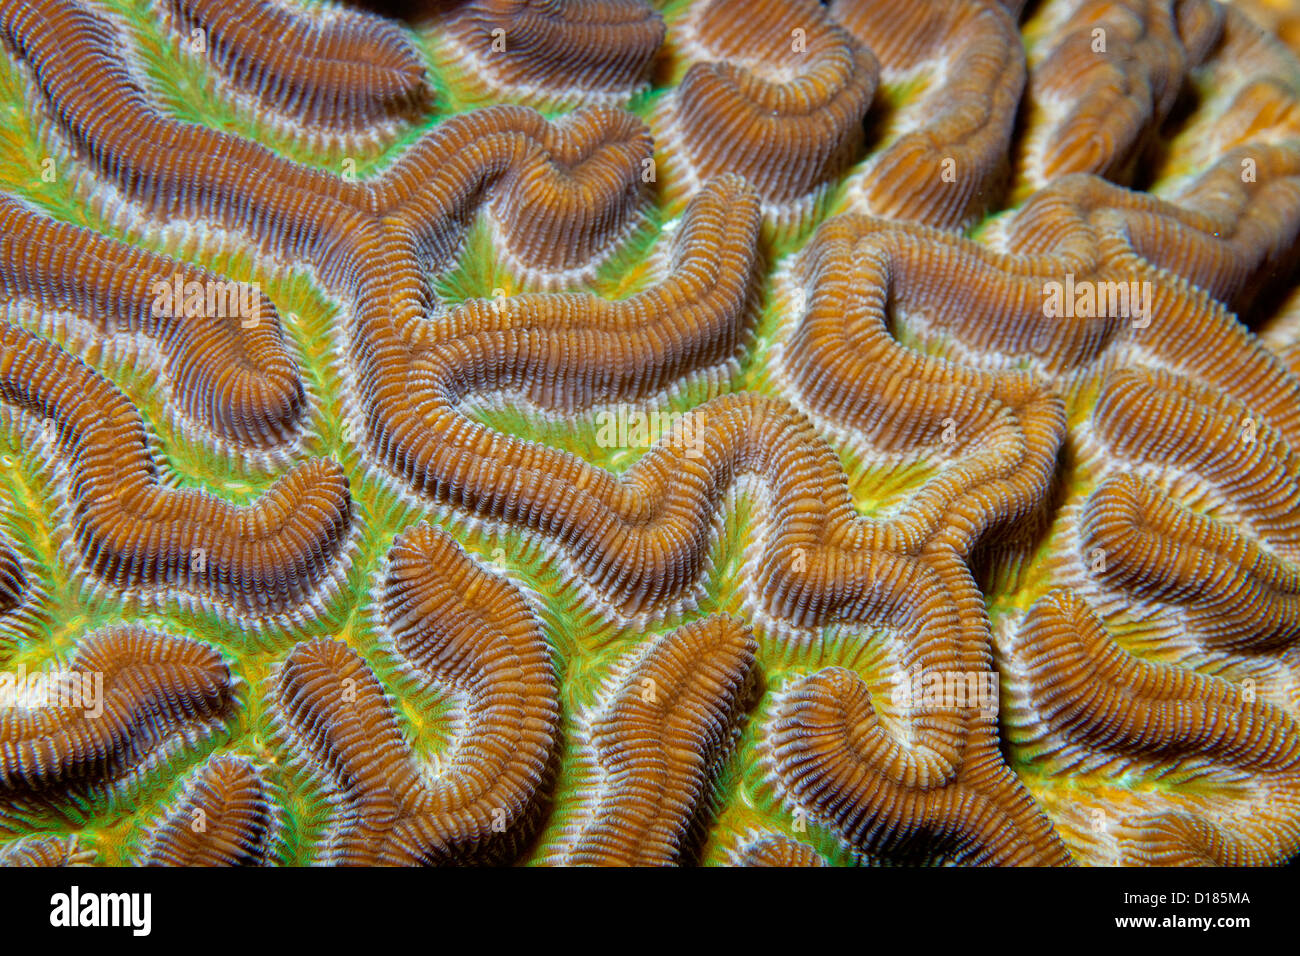 A close-up view of coral at the Swan Islands, Honduras. Stock Photo